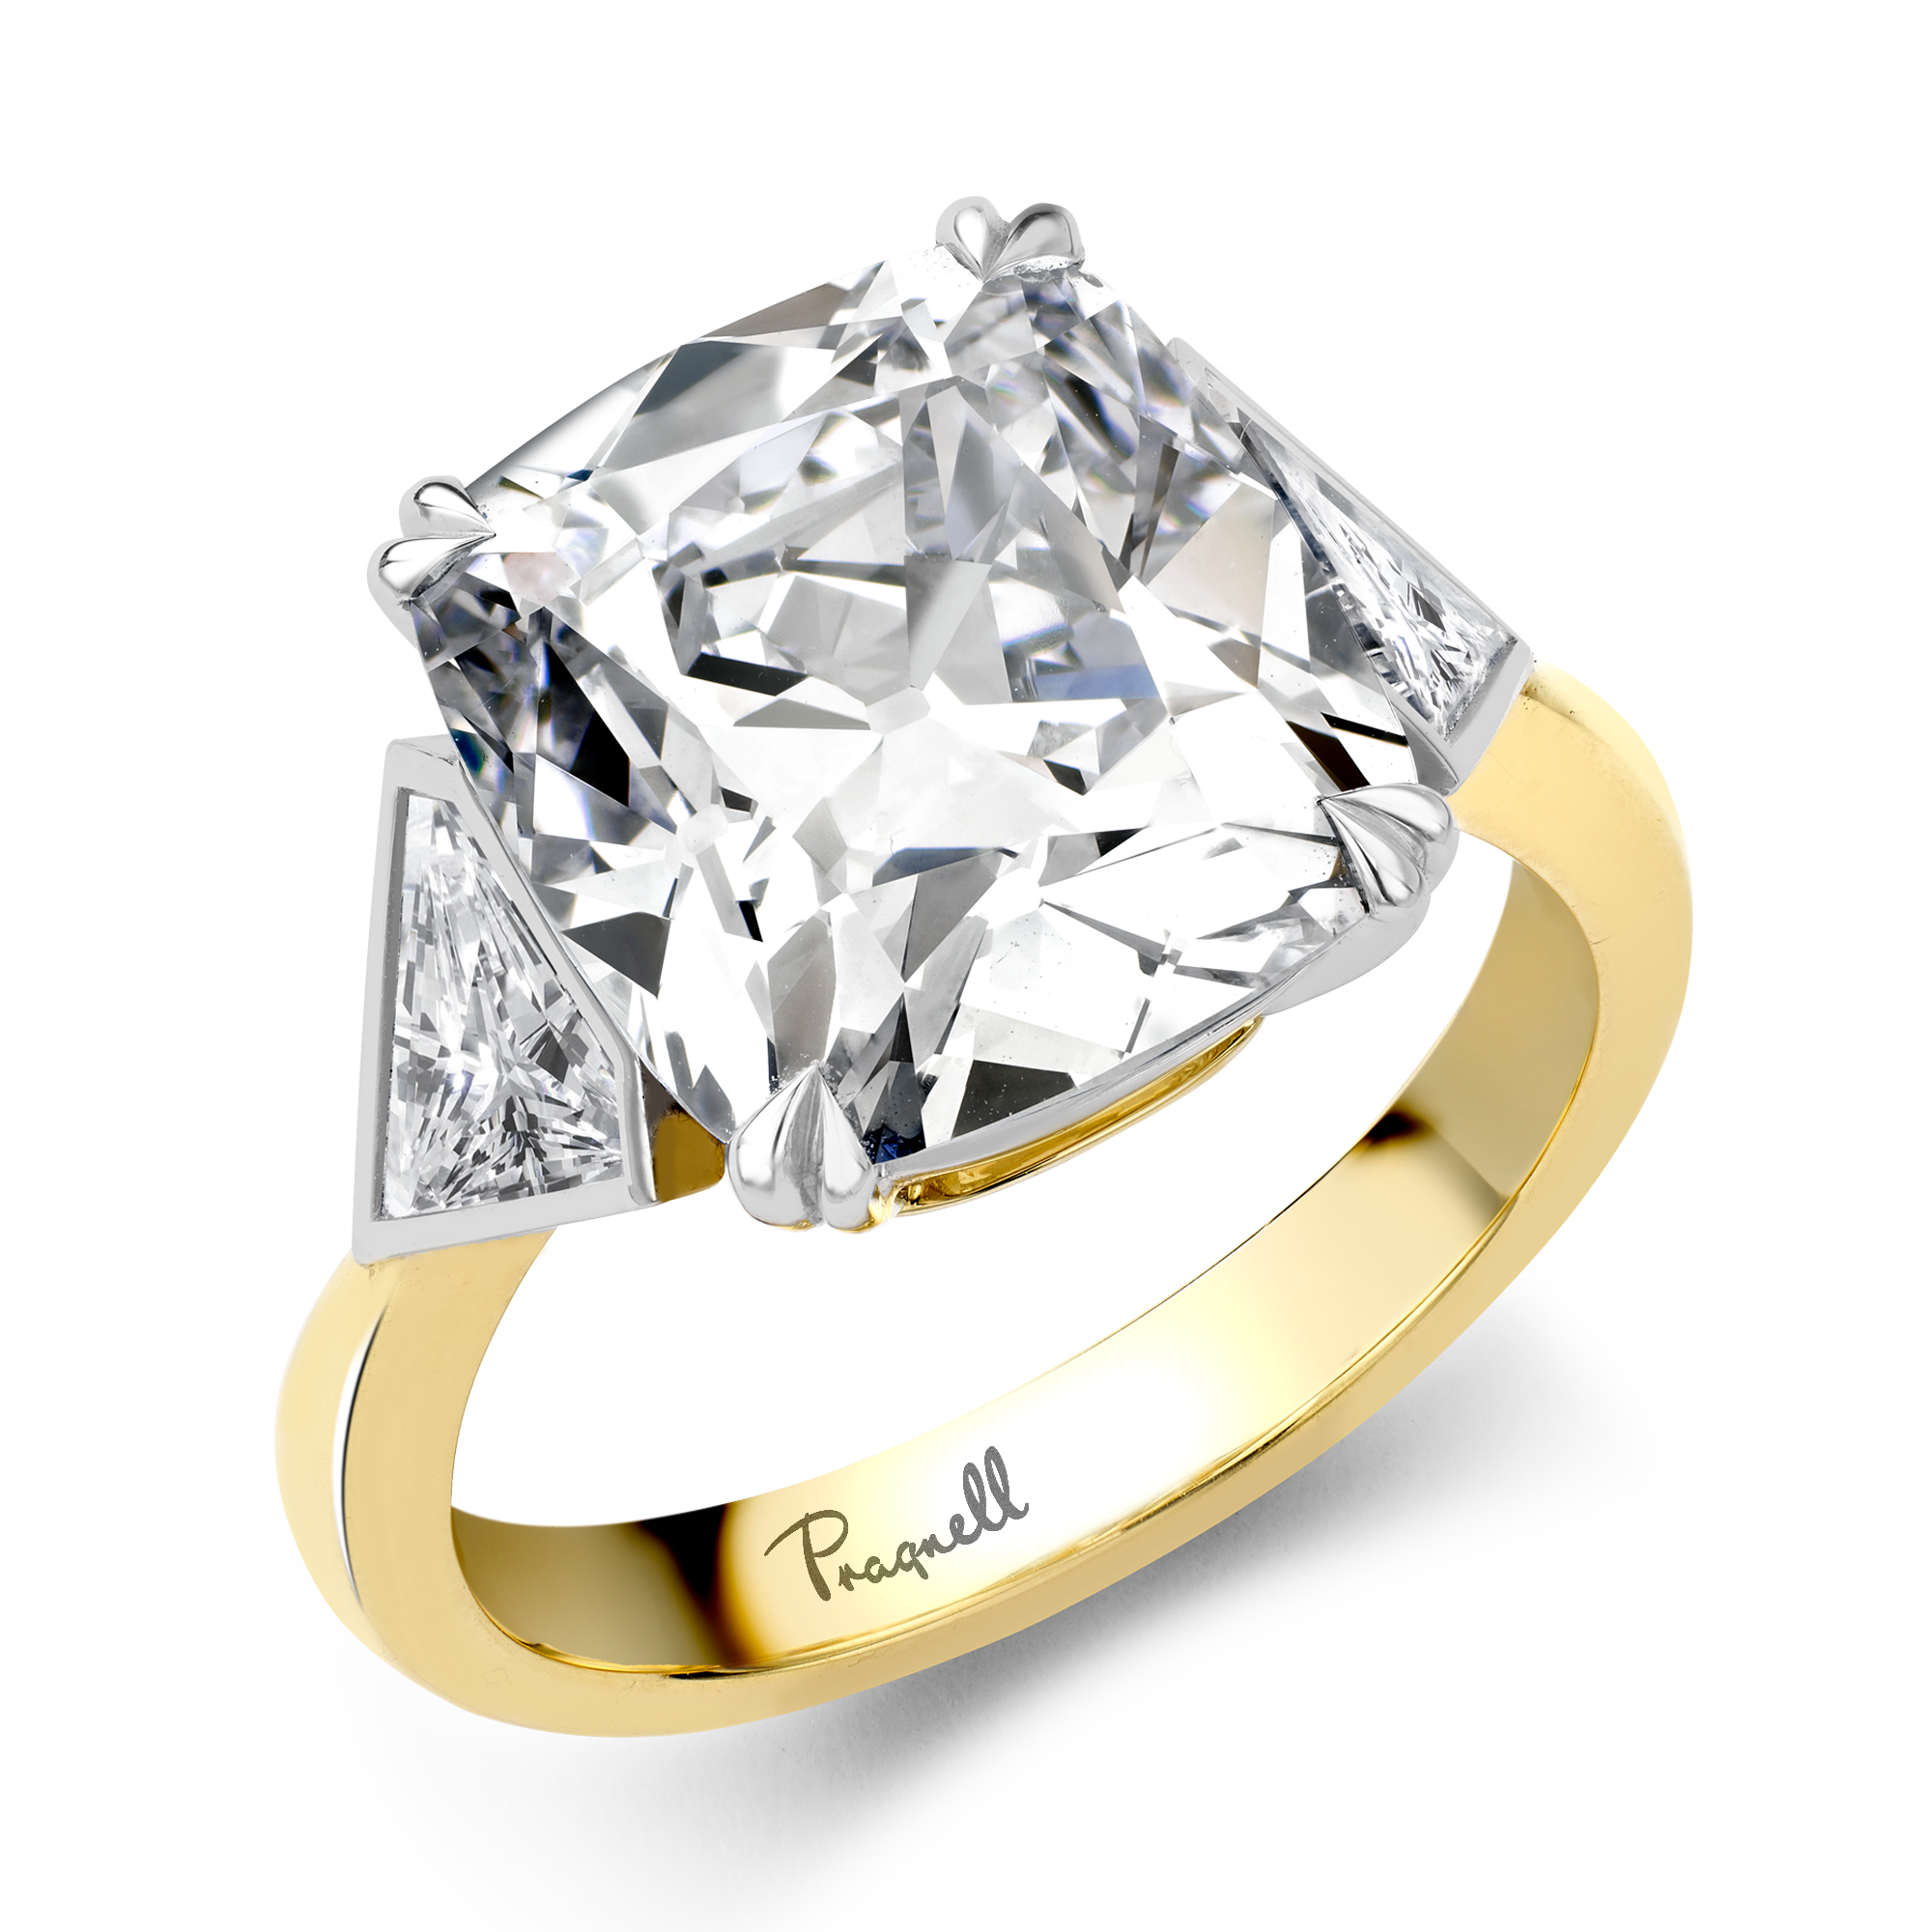 Masterpiece Silhouette Setting 6.98ct Diamond Solitaire Ring Cushion Antique Cut, Claw Set_1